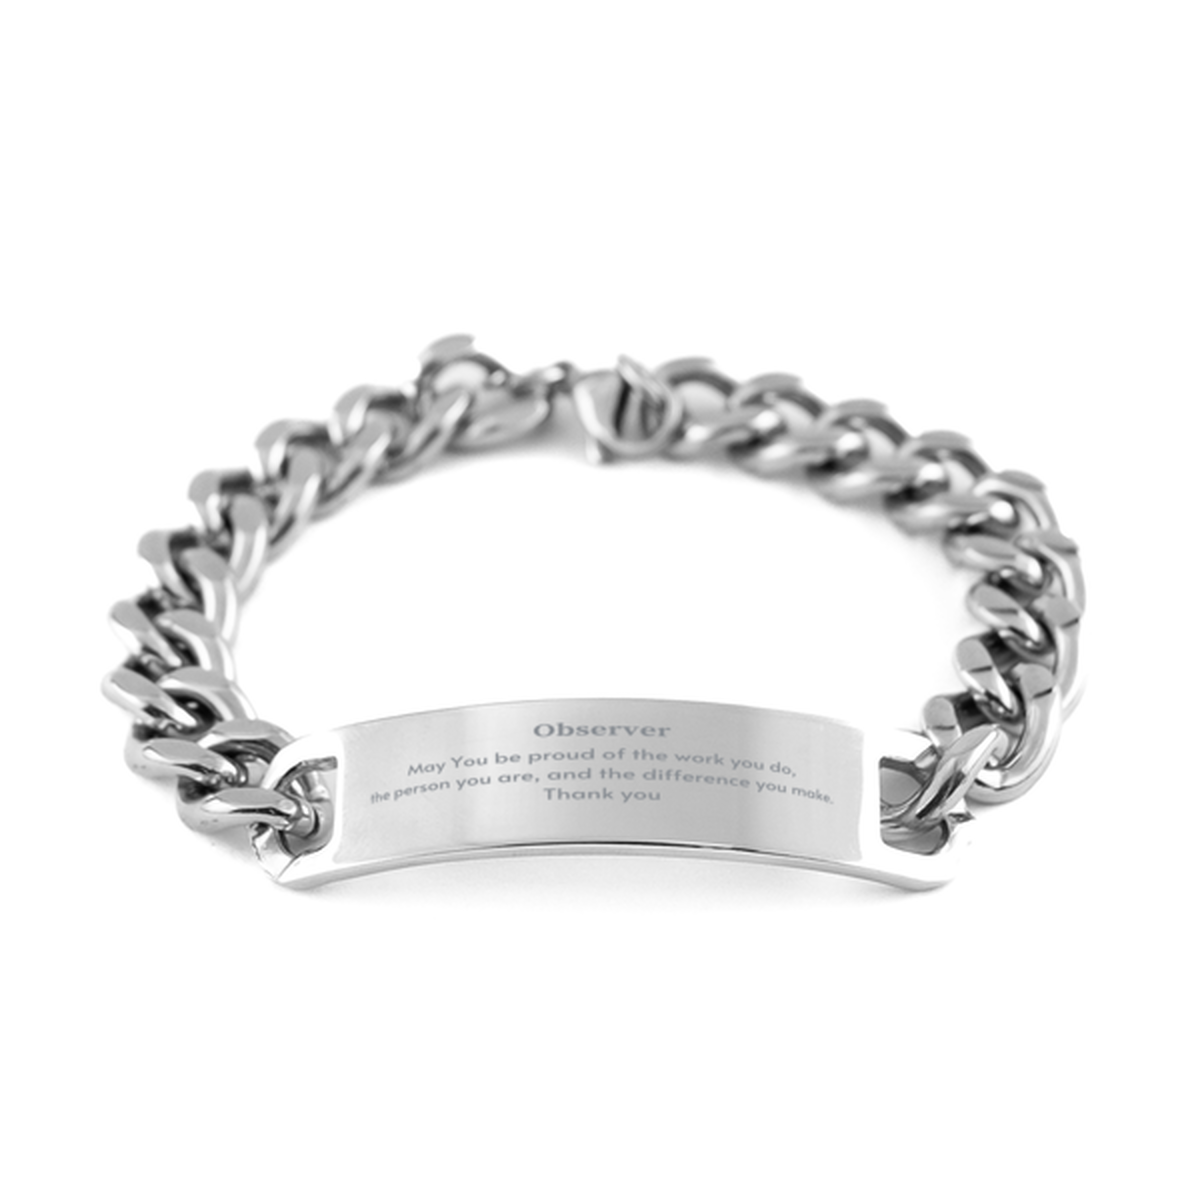 Heartwarming Cuban Chain Stainless Steel Bracelet Retirement Coworkers Gifts for Observer, Observer May You be proud of the work you do, the person you are Gifts for Boss Men Women Friends